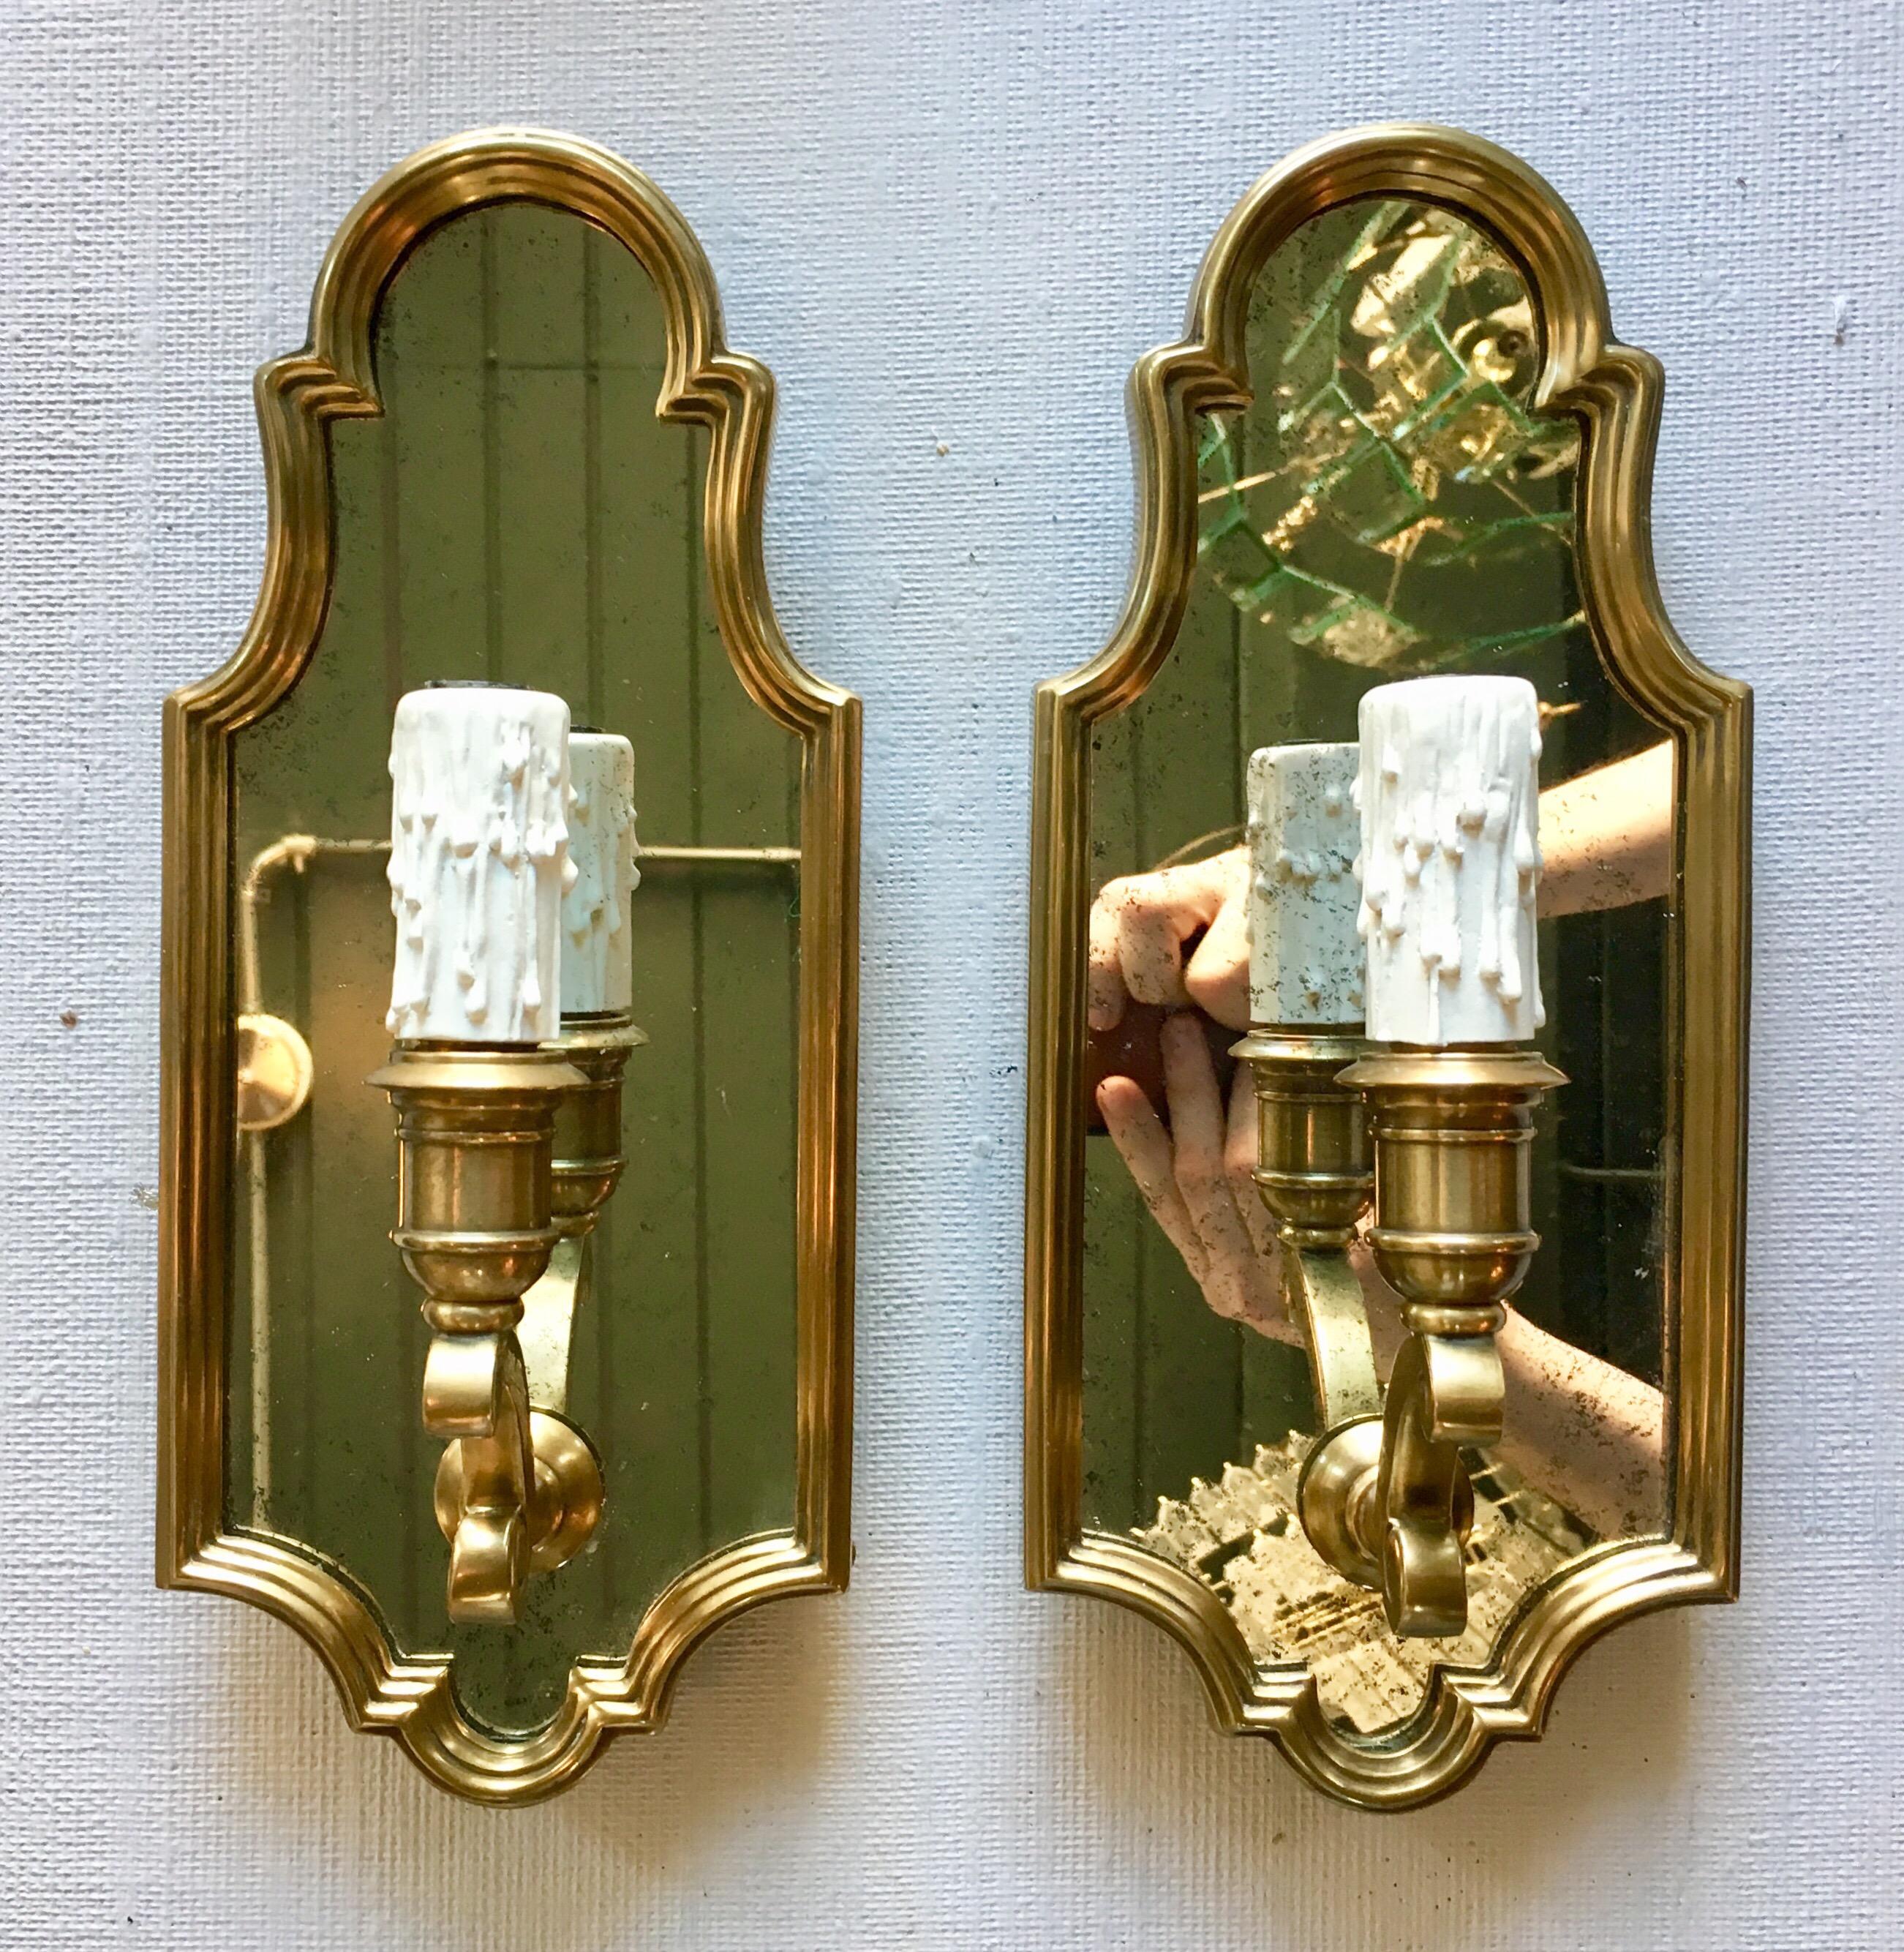 Pair of Hollywood Regency style antique-burnished brass and mirror wall candle light sconces by Chapman & Myers for Visual Comfort Lighting. Gold metal frames feature traditional scrolled detailing with inset aged mirrors. Single candle base 60 Watt